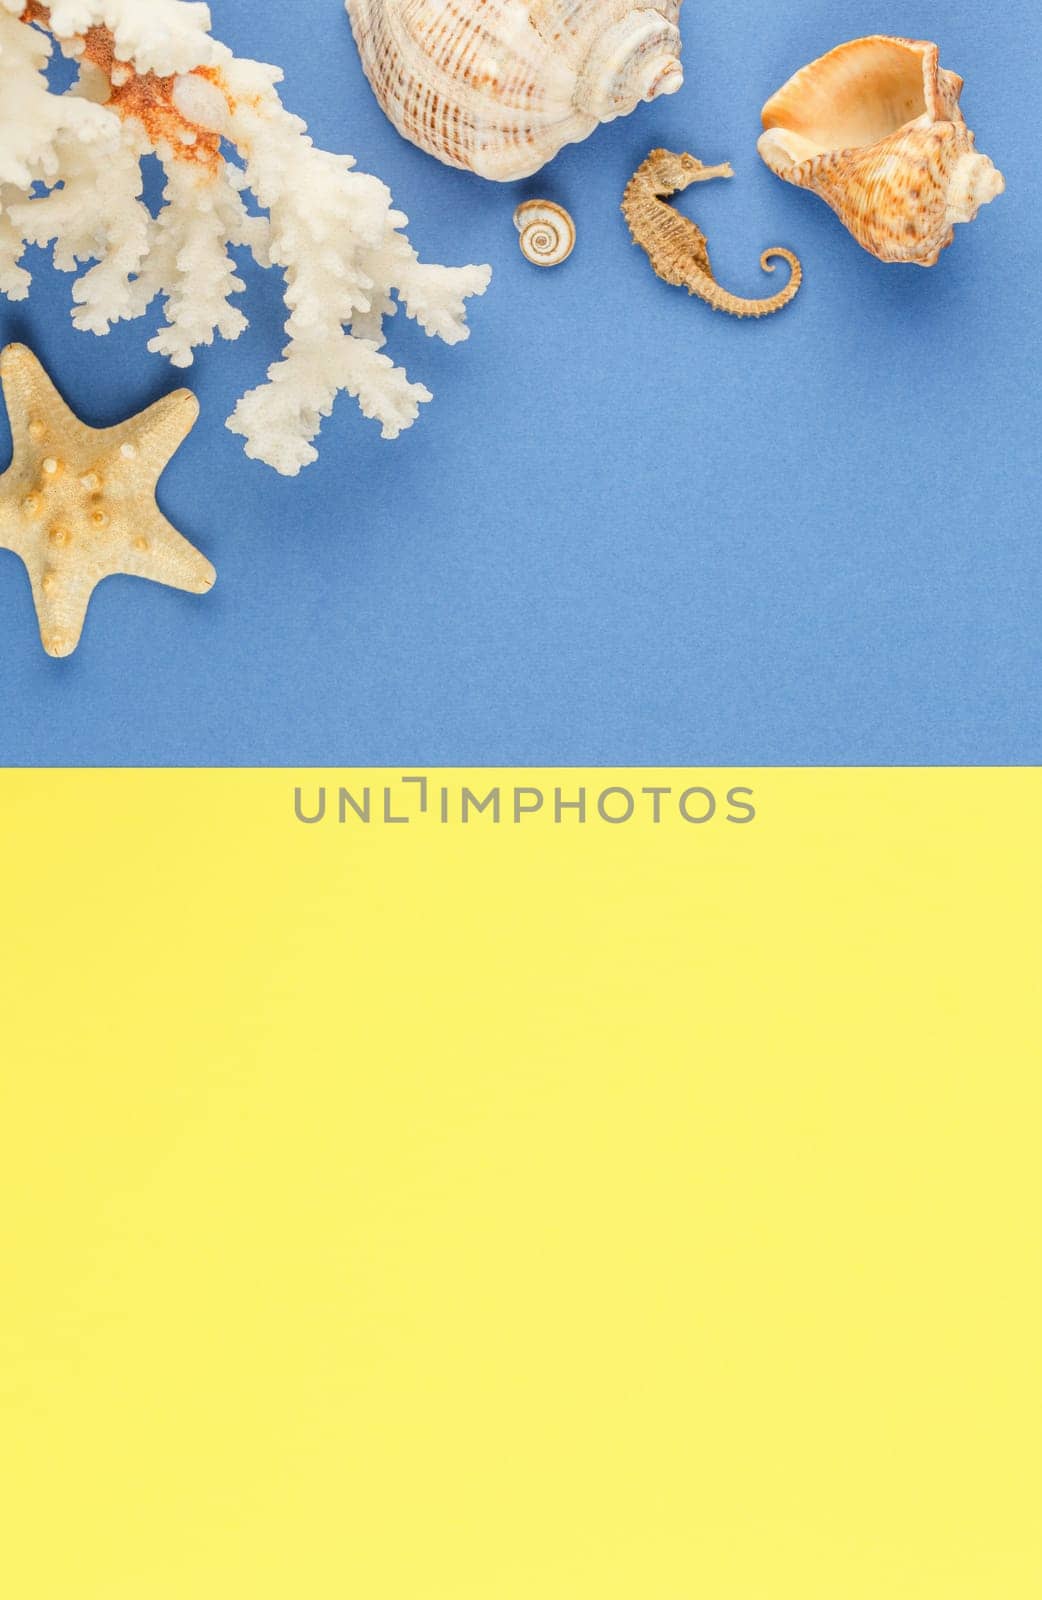 Seashells of sea molluscs with starfish on blue and yellow background. Photo top view with copyspace. Concept of a beach holiday on the coast. Flat lay.